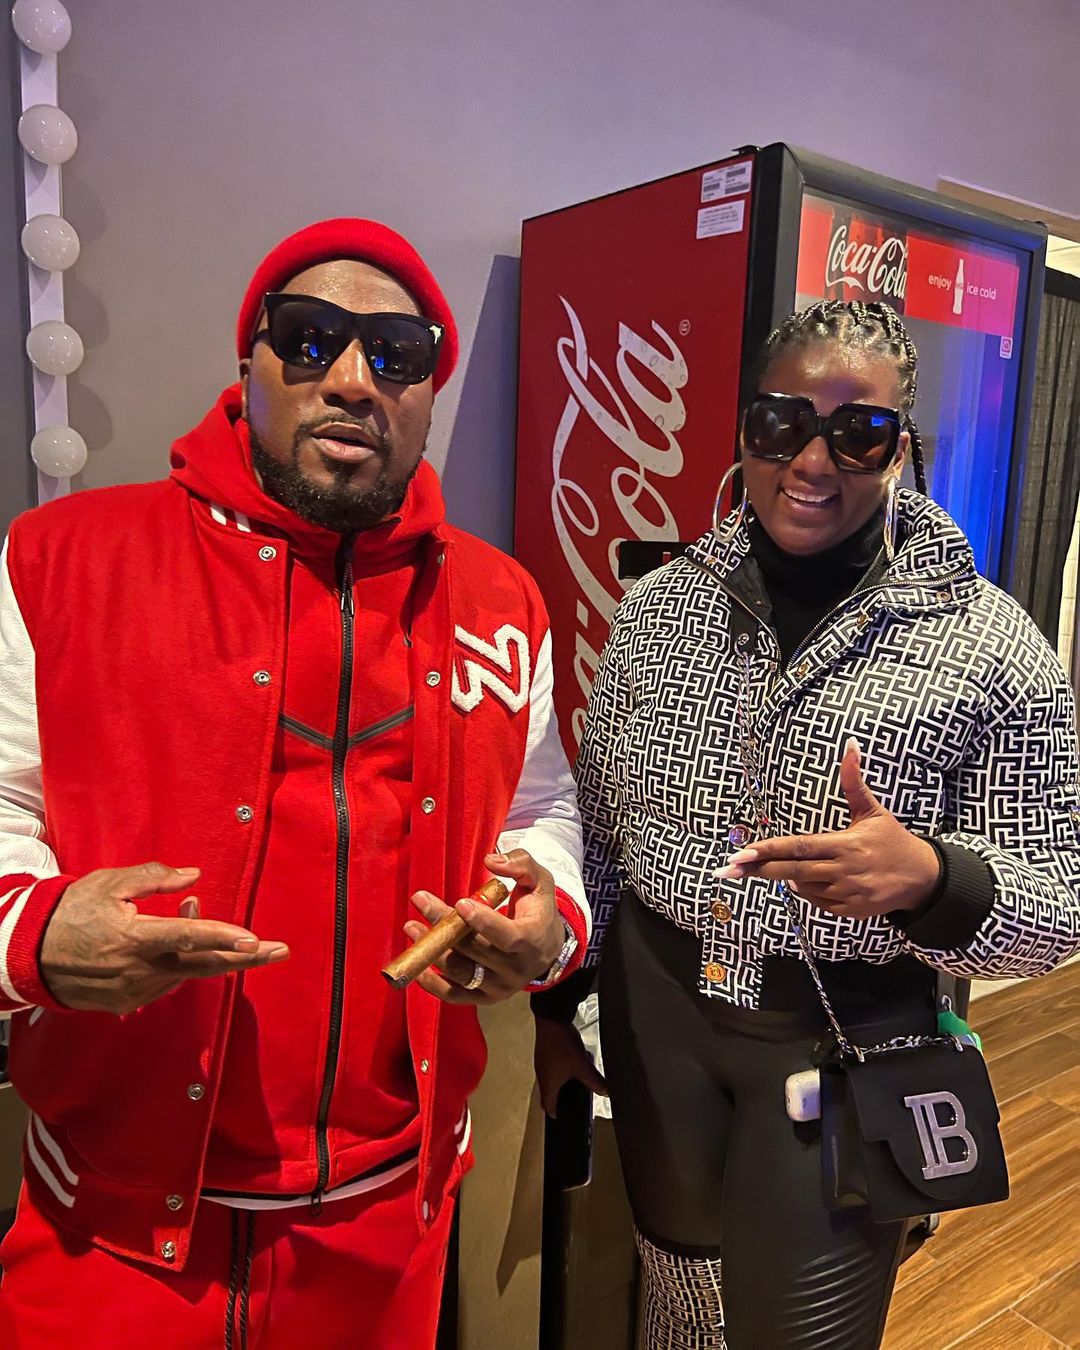 Shauwn Mkhize pictured with rapper Jeezy.